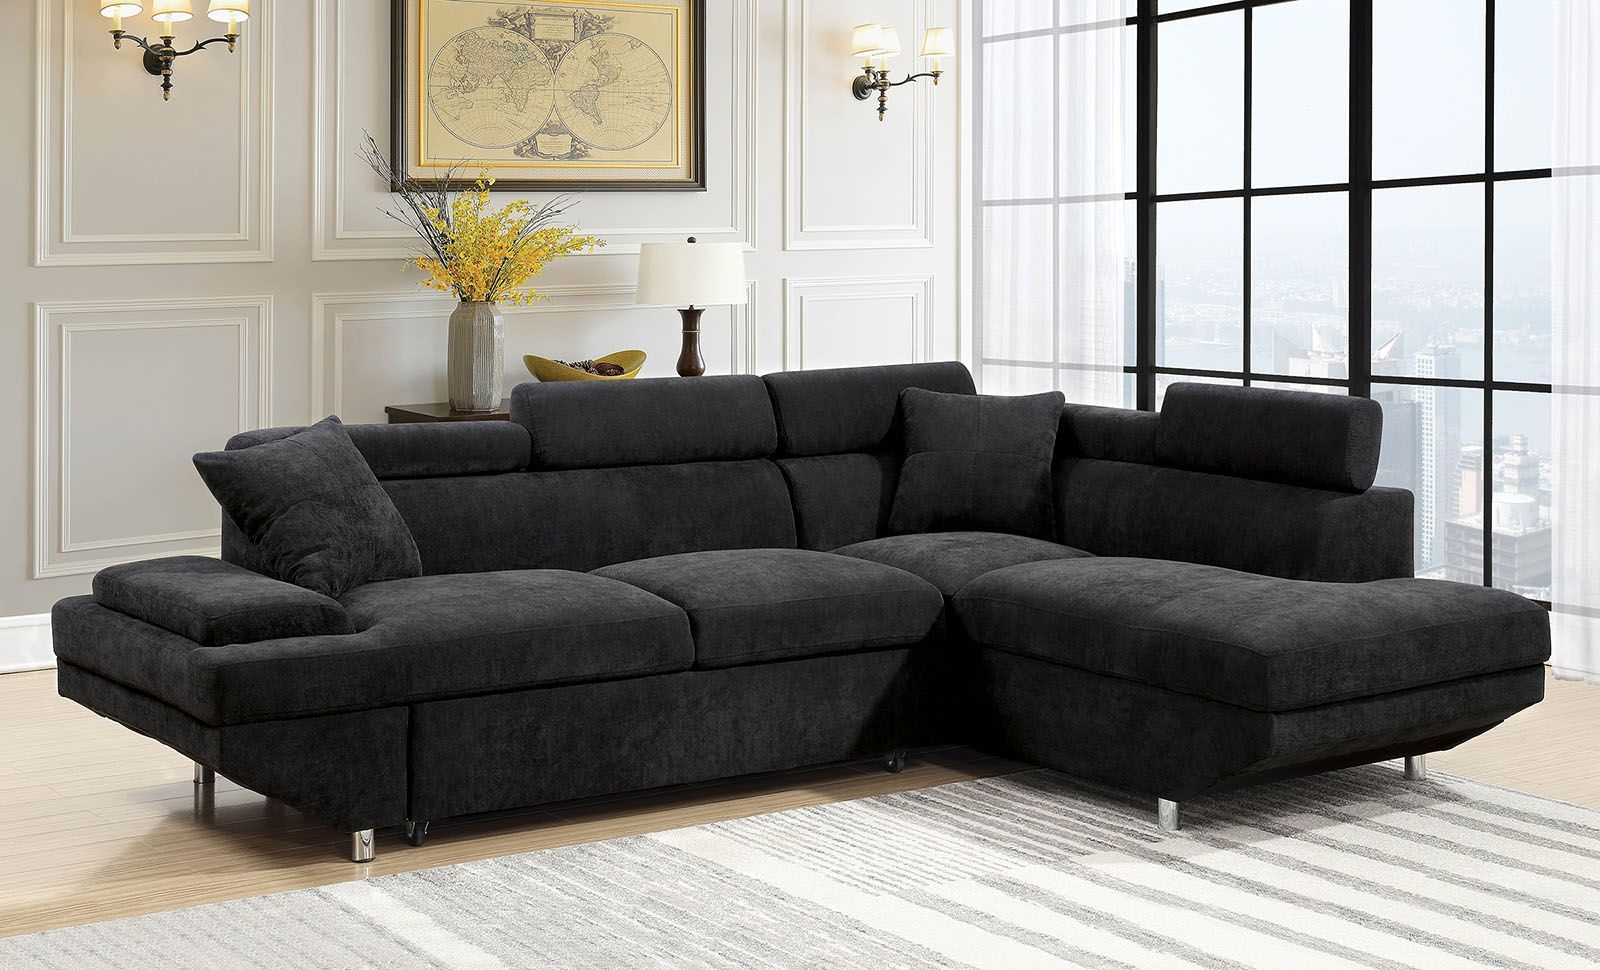 Foreman Contemporary Sectional Sleeper Sofa In Black With Regard To Contemporary Fabric Sofas (View 3 of 15)